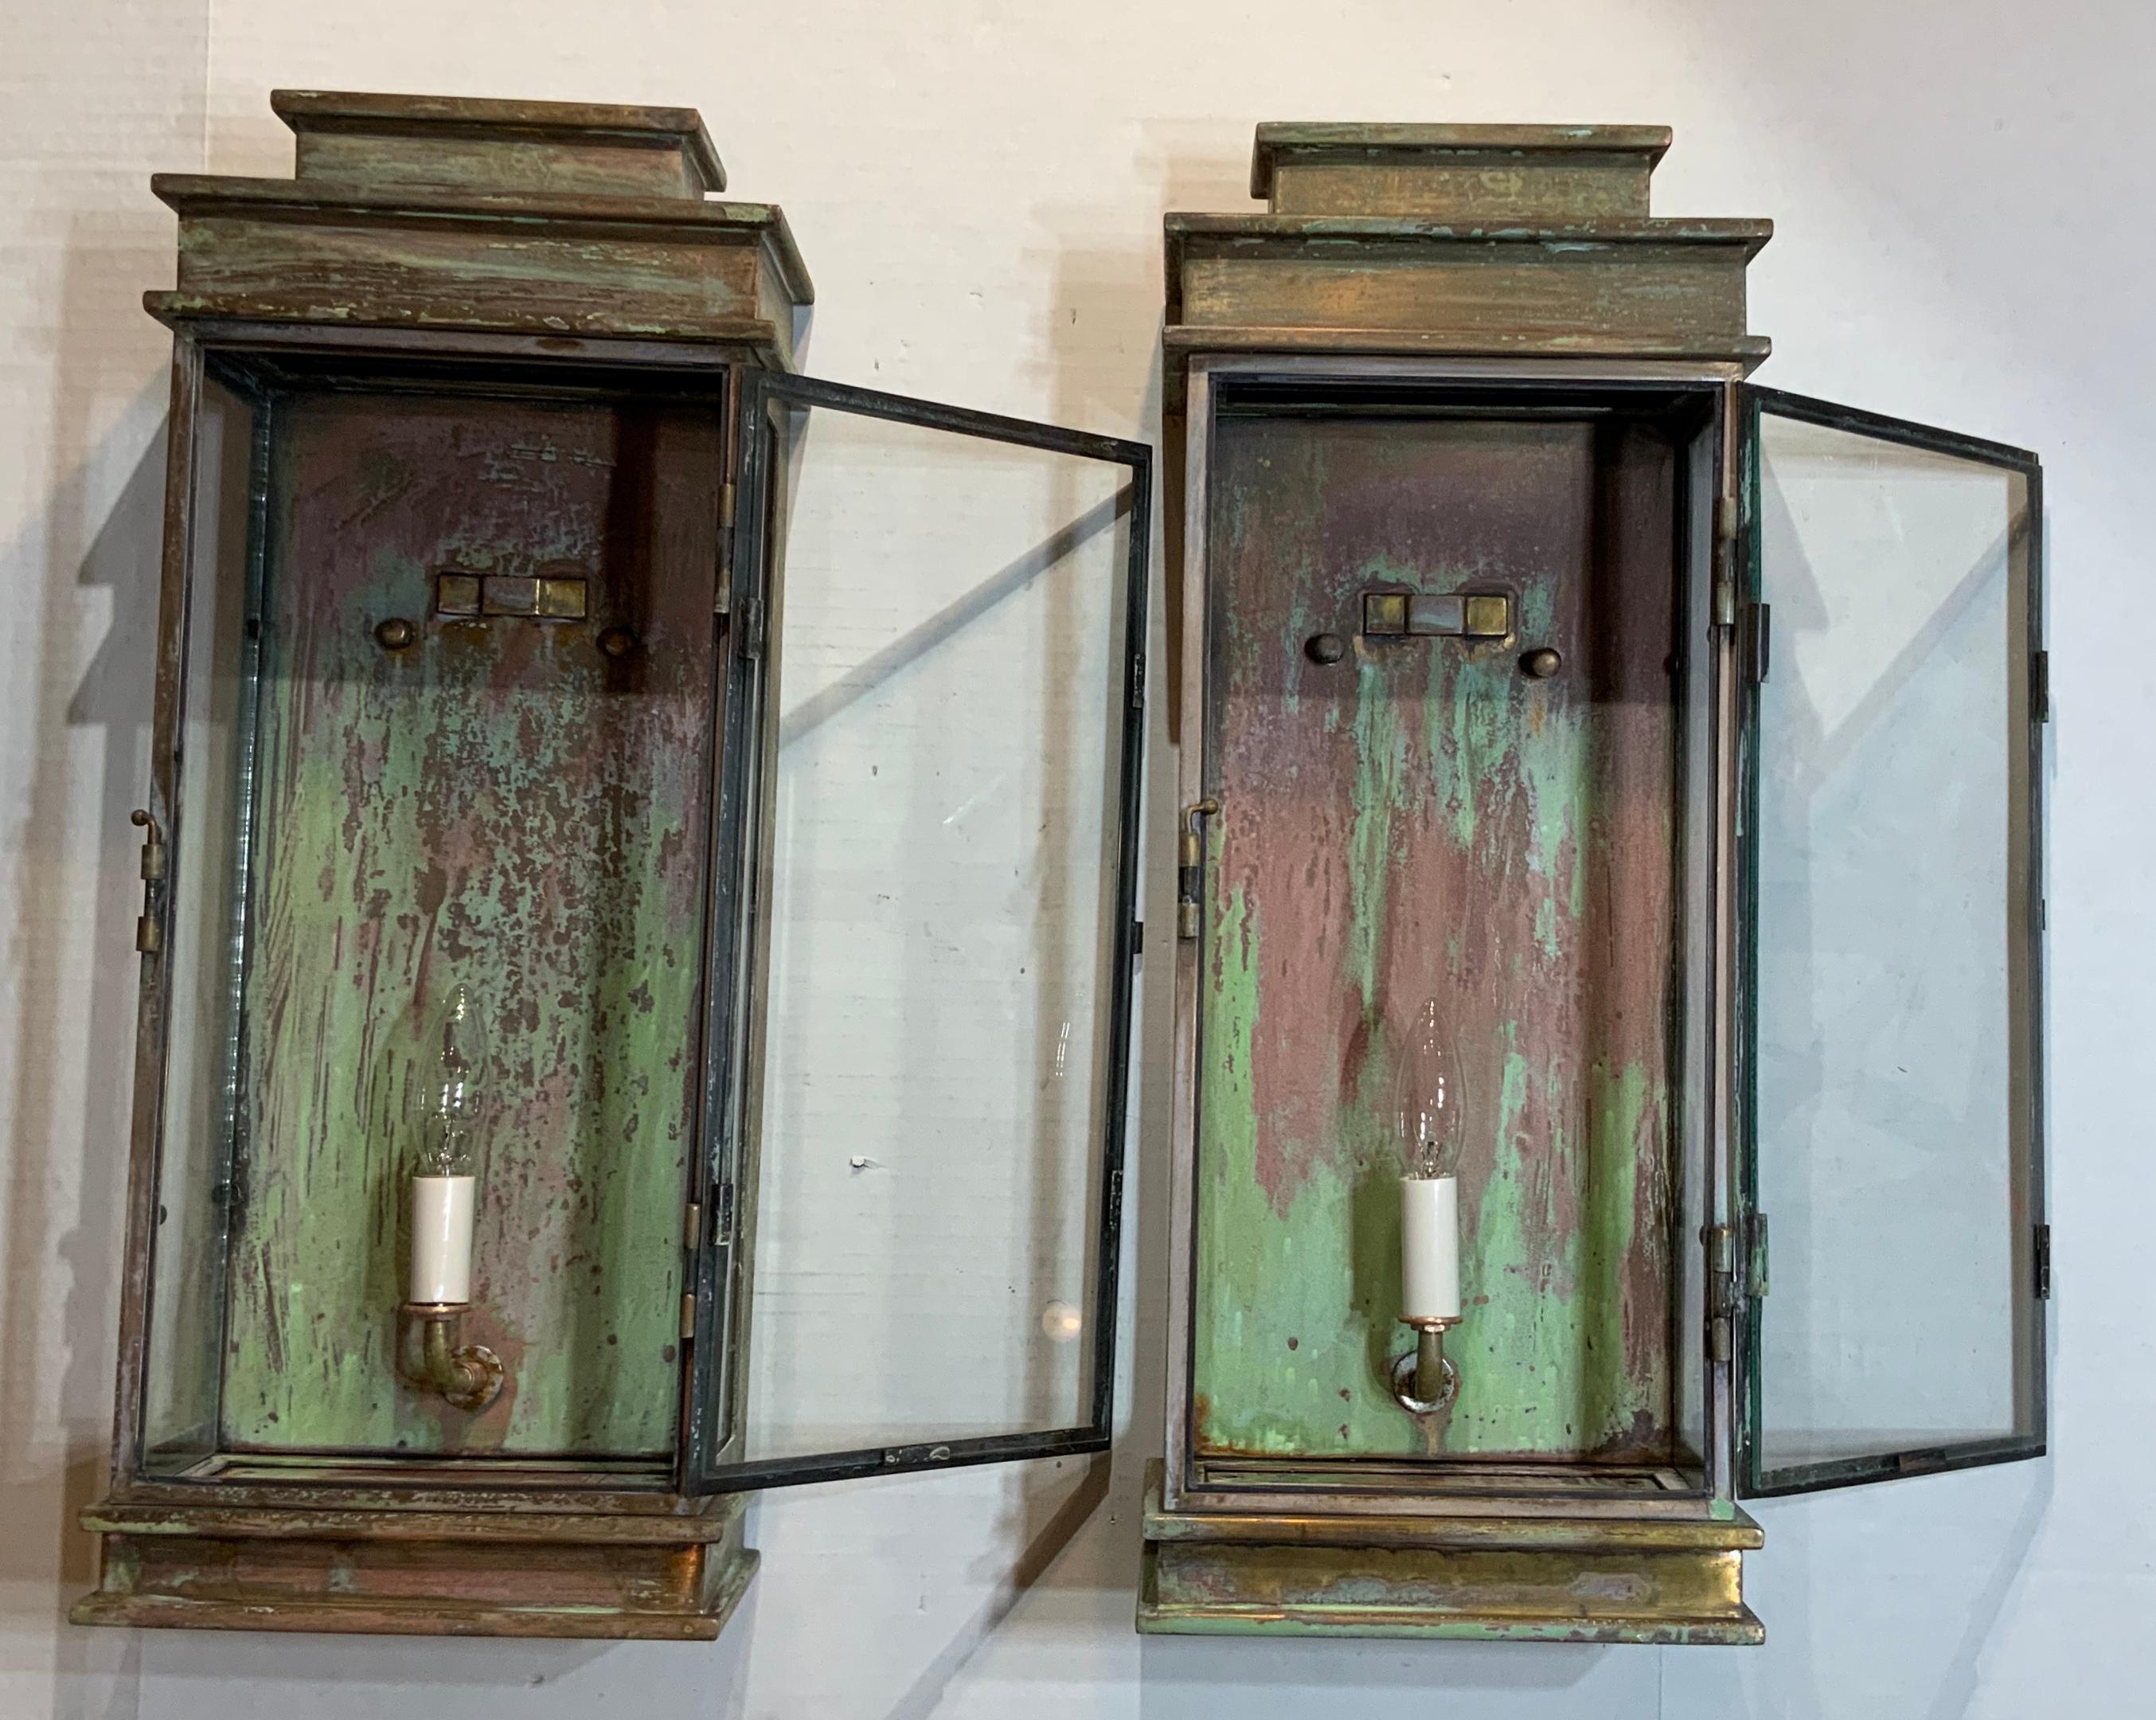 Pair of elegant wall hanging lanterns made of solid brass, beautiful weathered patina with one 60/watt light each. Suitable for wet locations. This pair will look great also as indoor sconces very decorative pair.